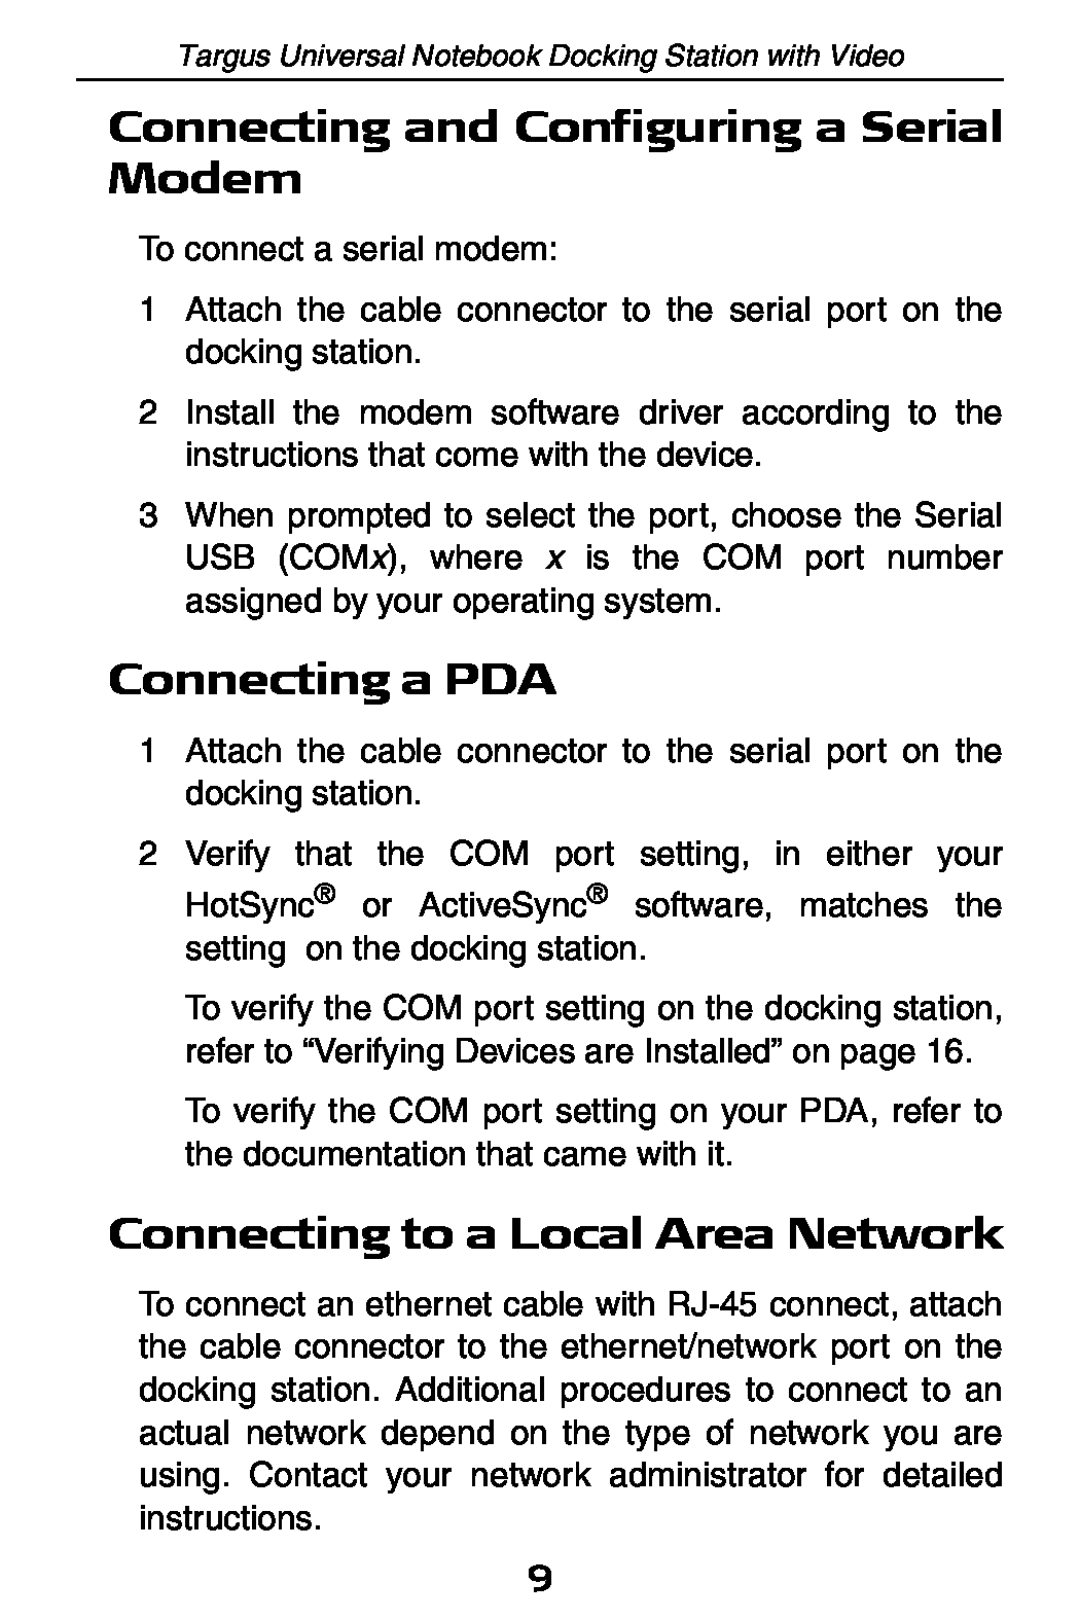 Targus ACP50 specifications Connecting and Configuring a Serial Modem, Connecting a PDA, Connecting to a Local Area Network 